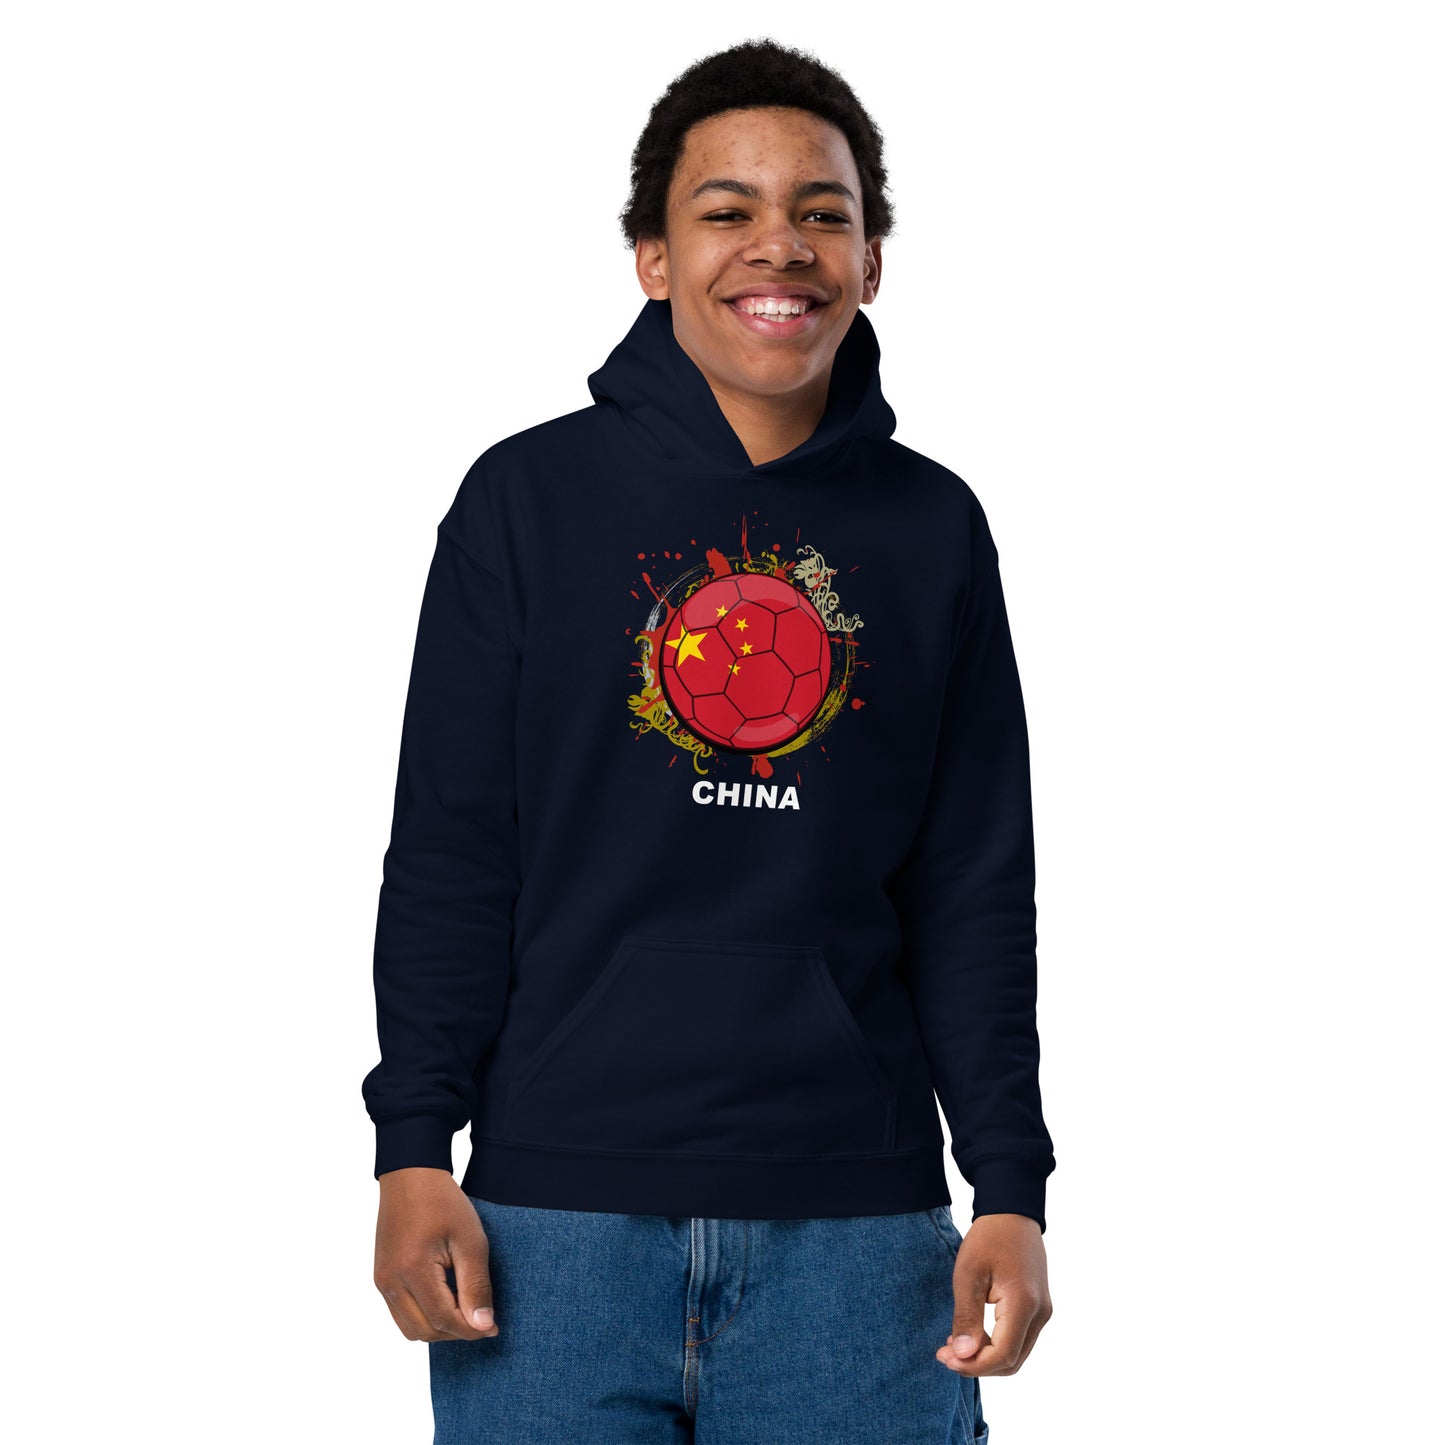 China Soccer - Youth heavy blend hoodie - Darks